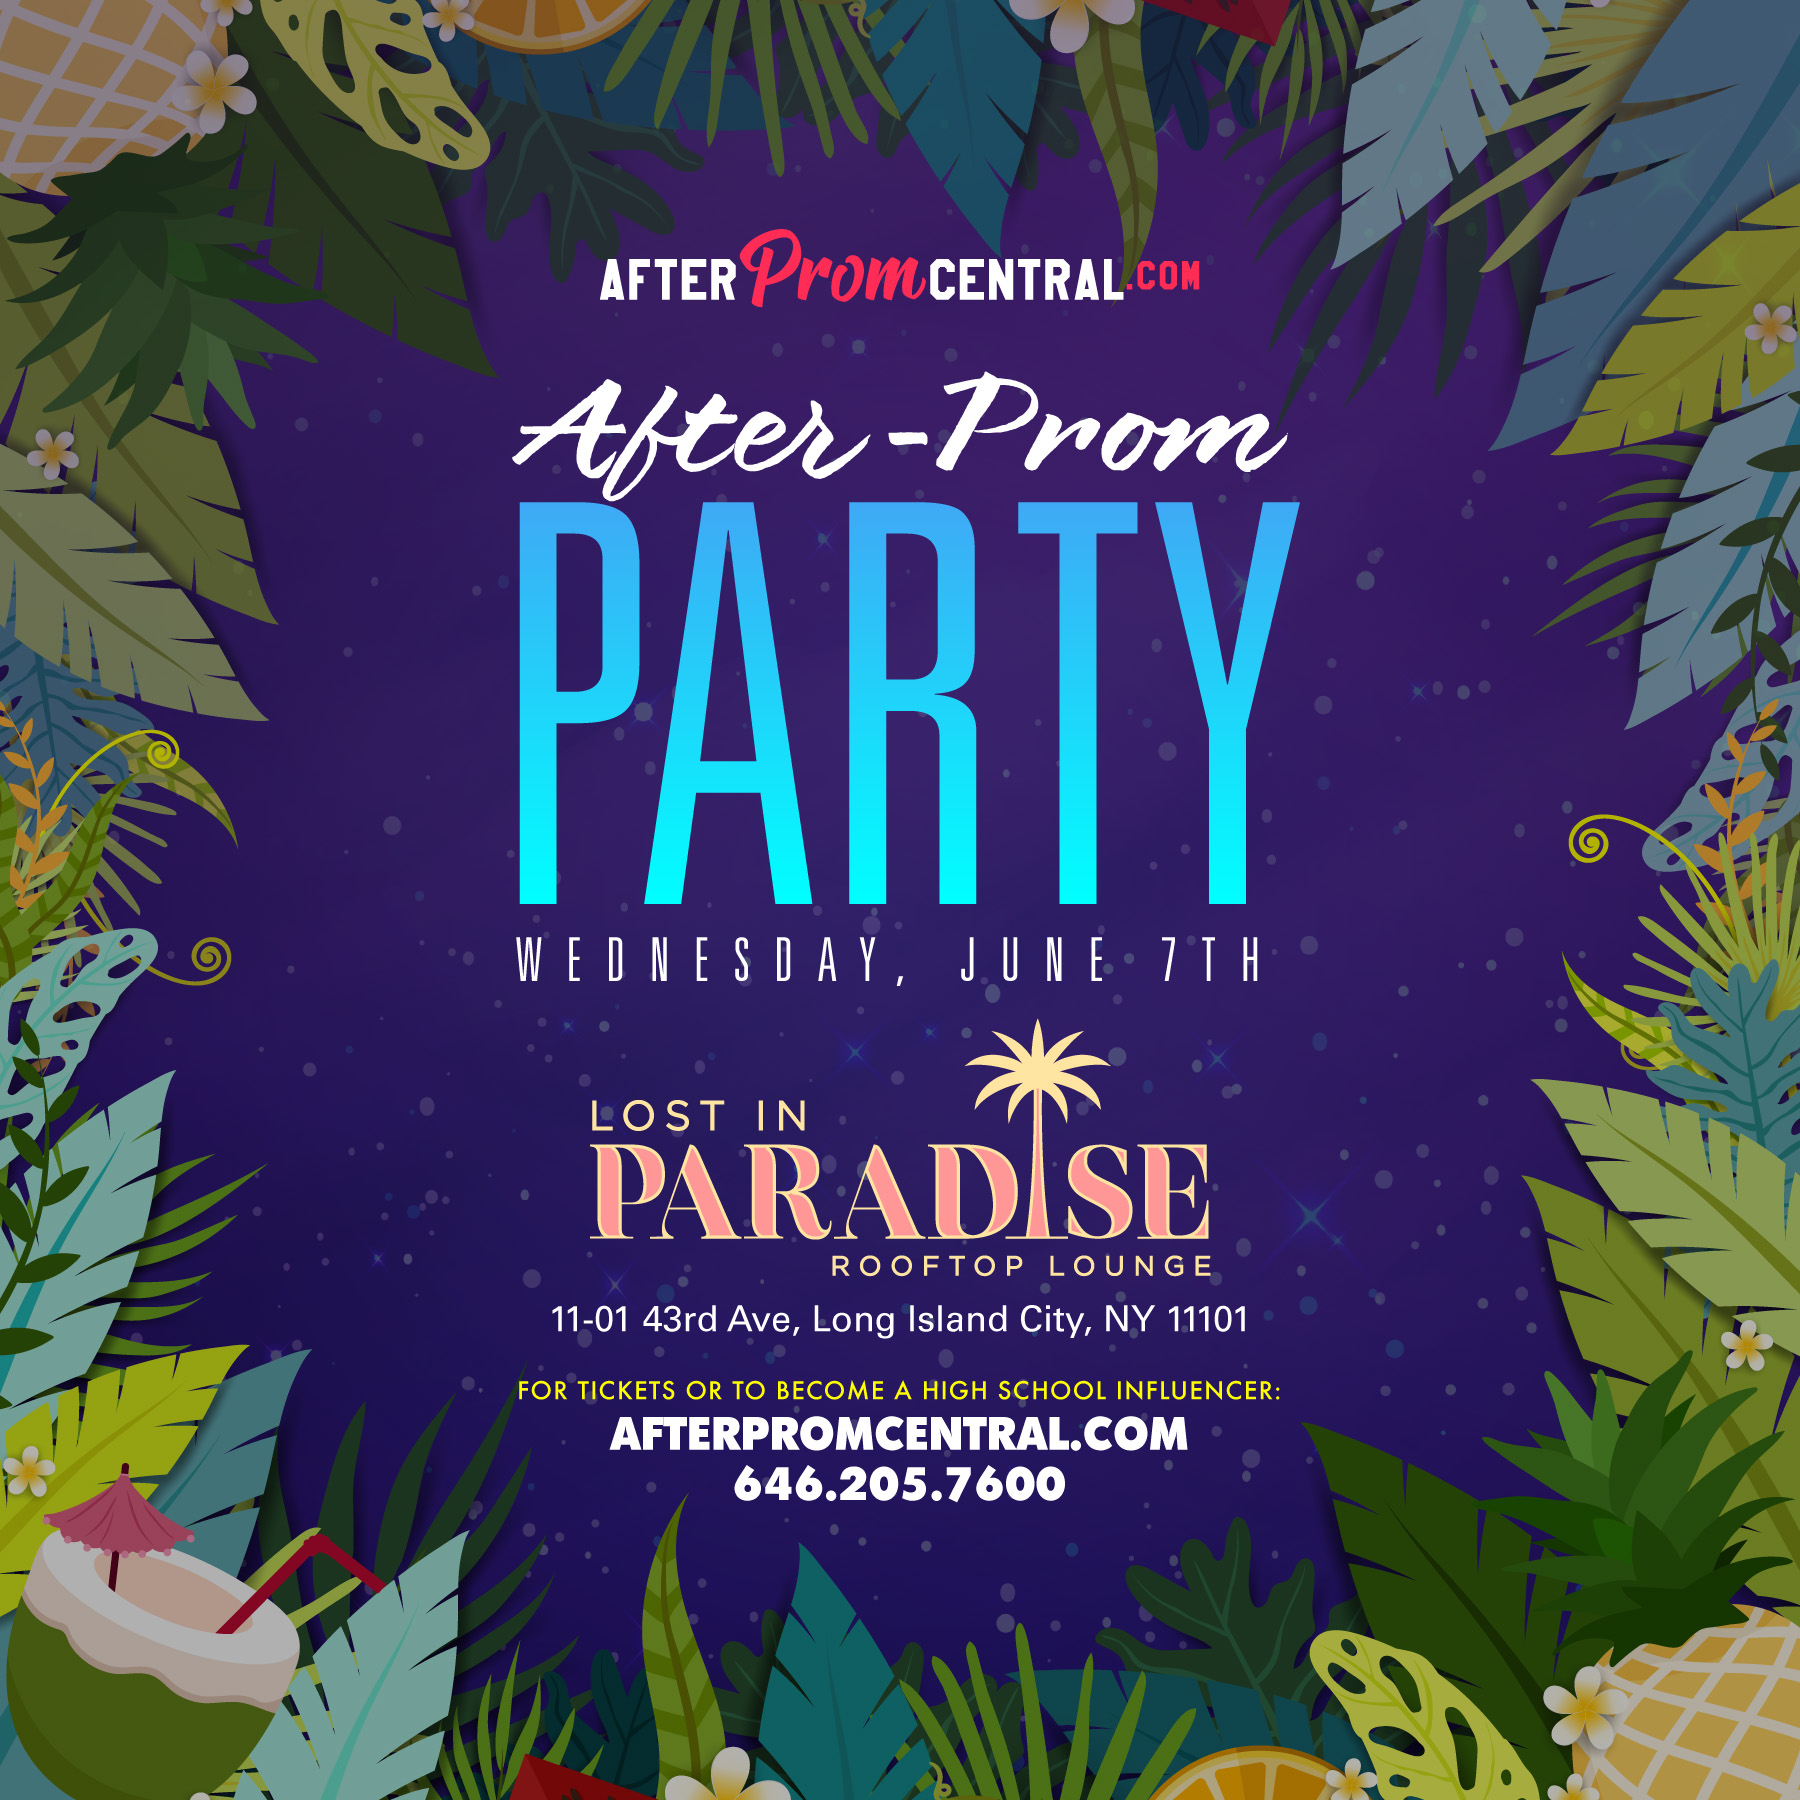 https://www.afterpromcentral.com/wp-content/uploads/2023/02/lost-in-paradise-rooftop-after-prom-party.jpg